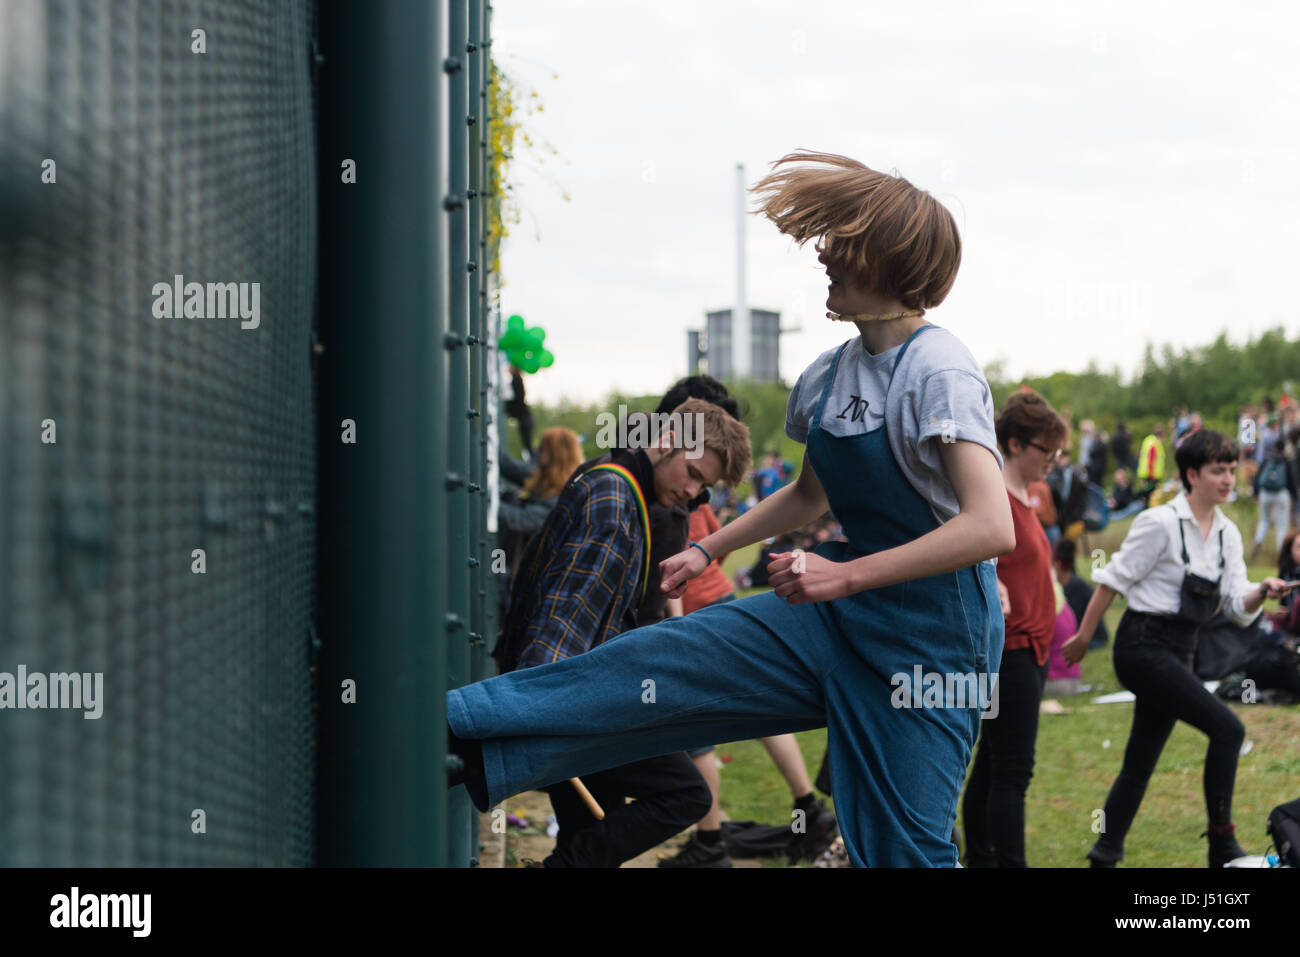 Bedford, UK. 15th May, 2017. Protesters kick the Yarl's Wood Immigration Removal Centre's perimeter fence during a protest against UK immigration detention policy. Hundreds of protesters demonstrated outside the Yarl's Wood centre, kicking and hitting the perimeter fence, and calling for the centre to be shutdown. Credit: Jacob Sacks-Jones/Alamy Live News. Stock Photo